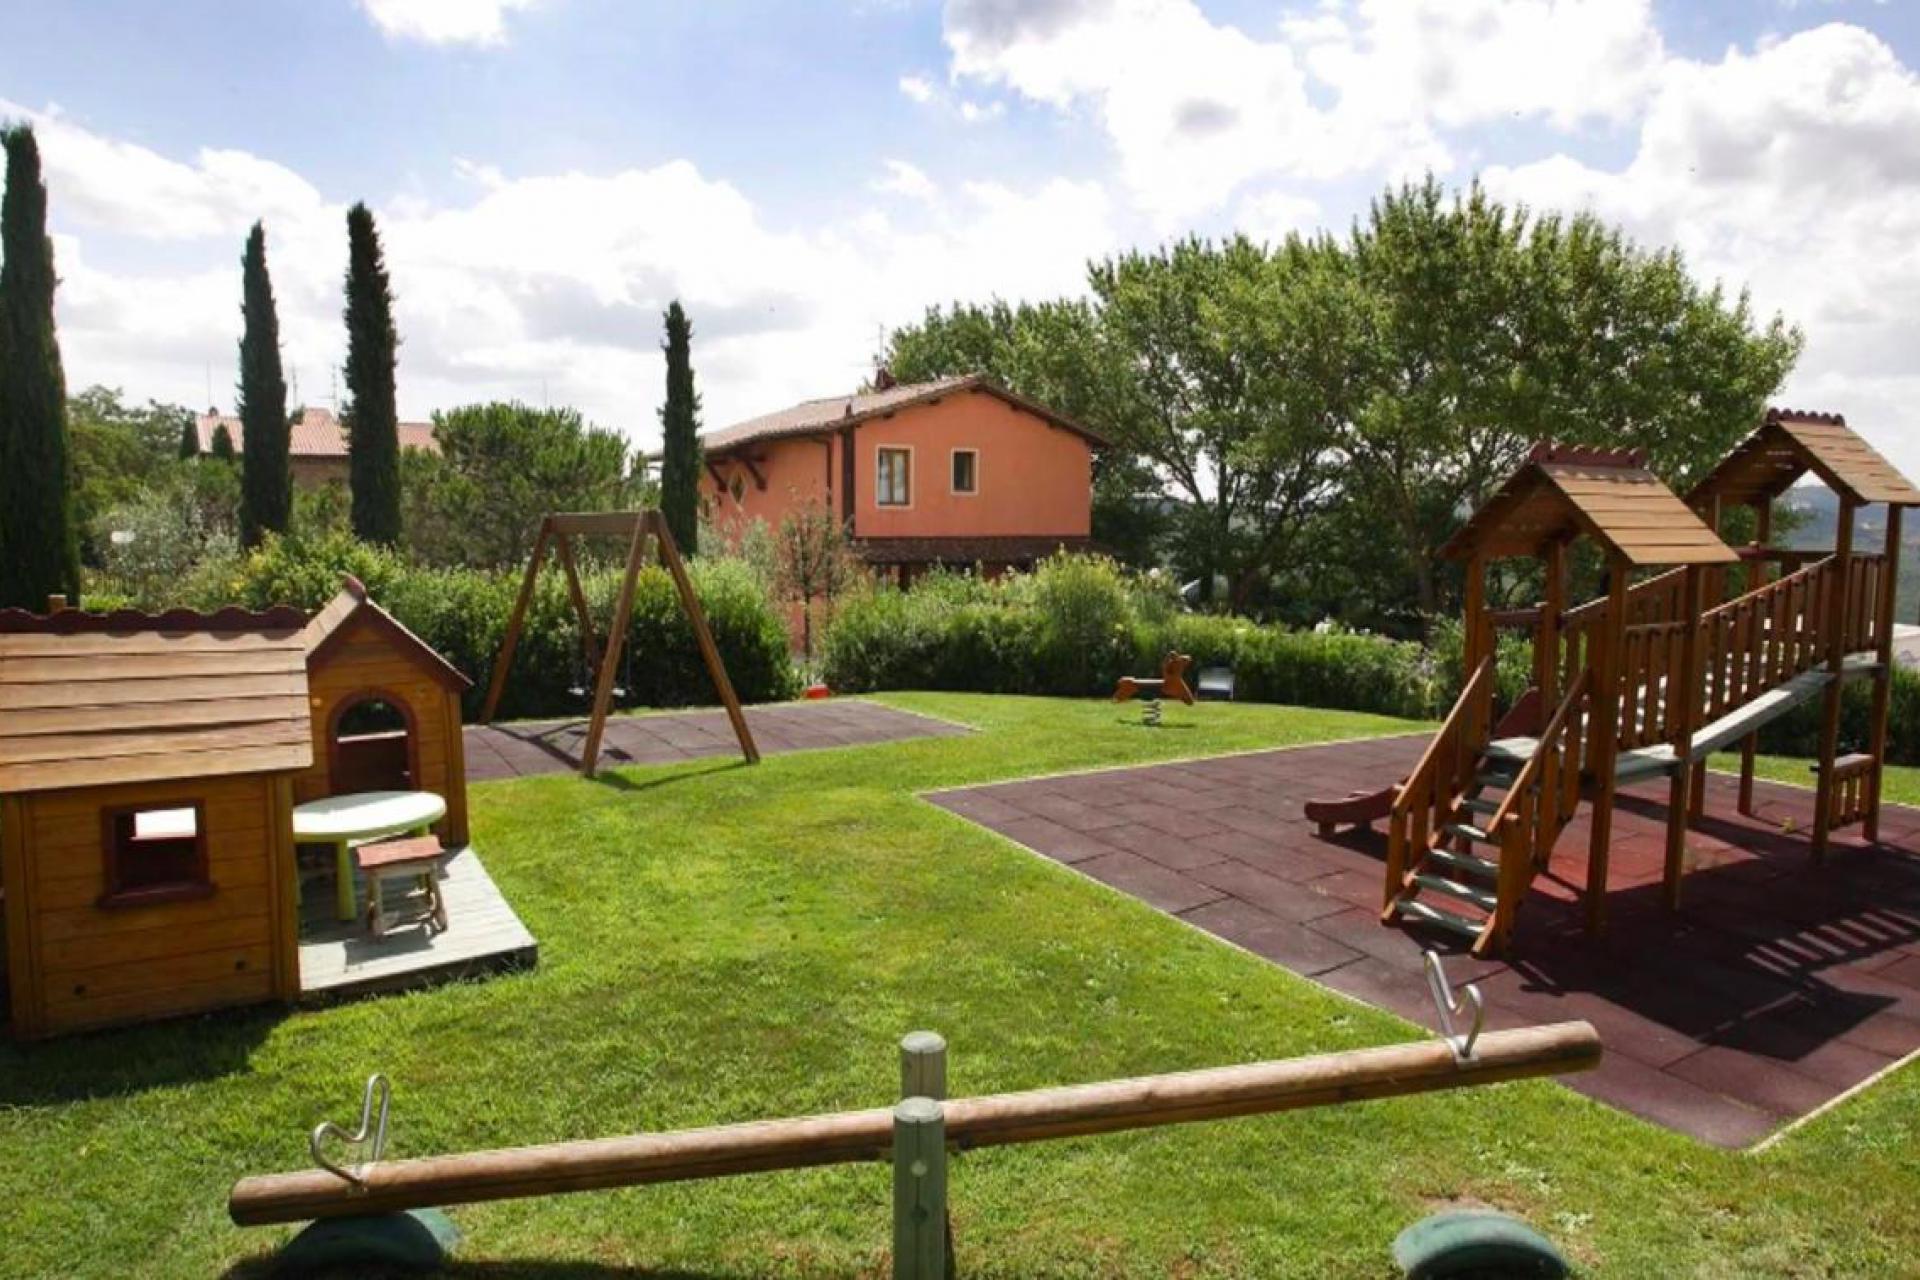 Large agriturismo with a beautiful central location in Tuscany